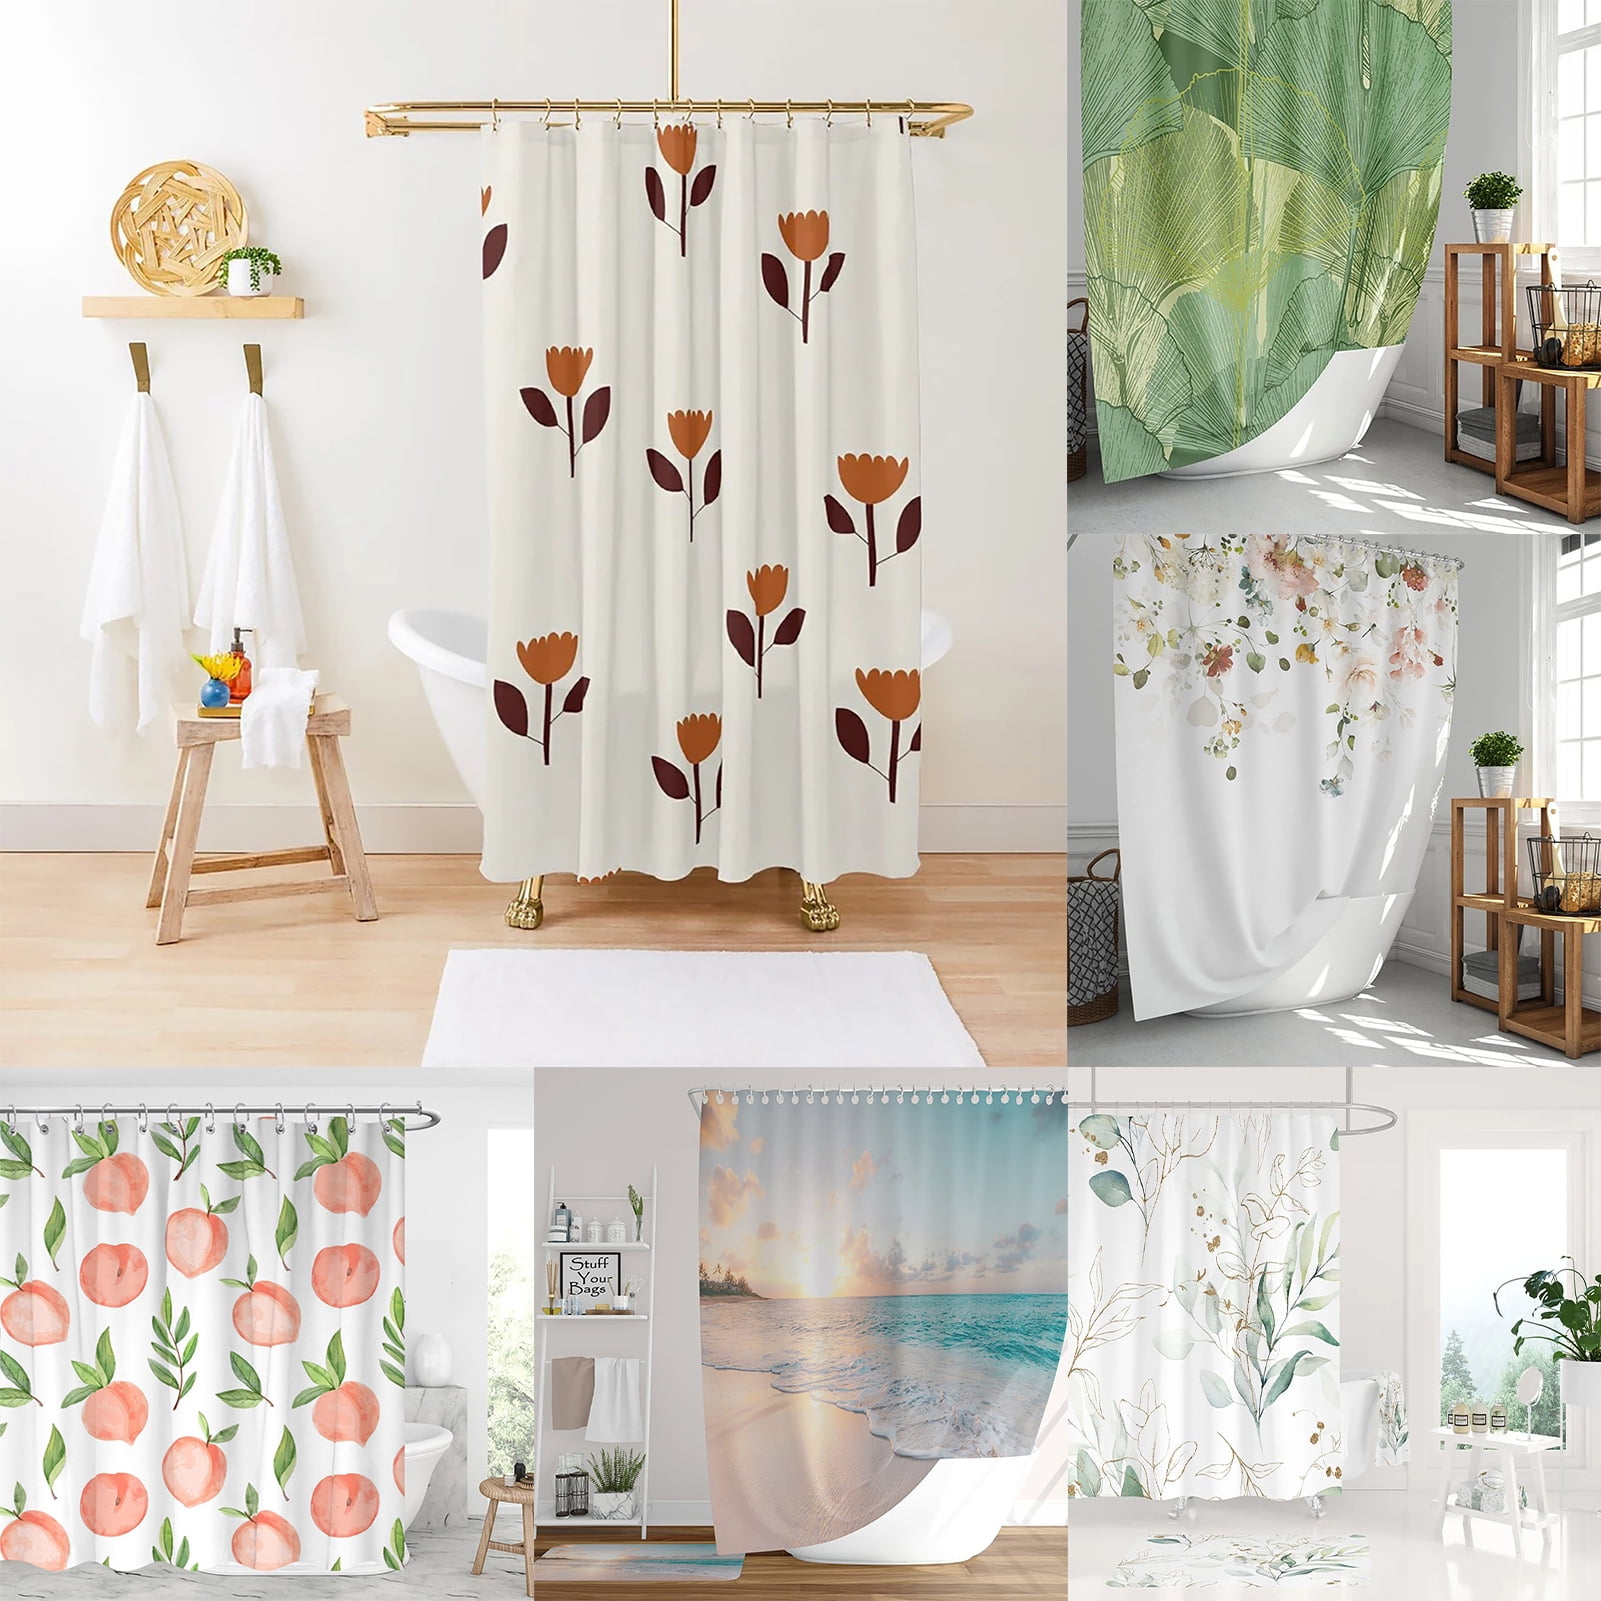 Details about   Nice Vintage Steams Wildflower Cute Farmhouse Waterproof Fabric Shower Curtain 